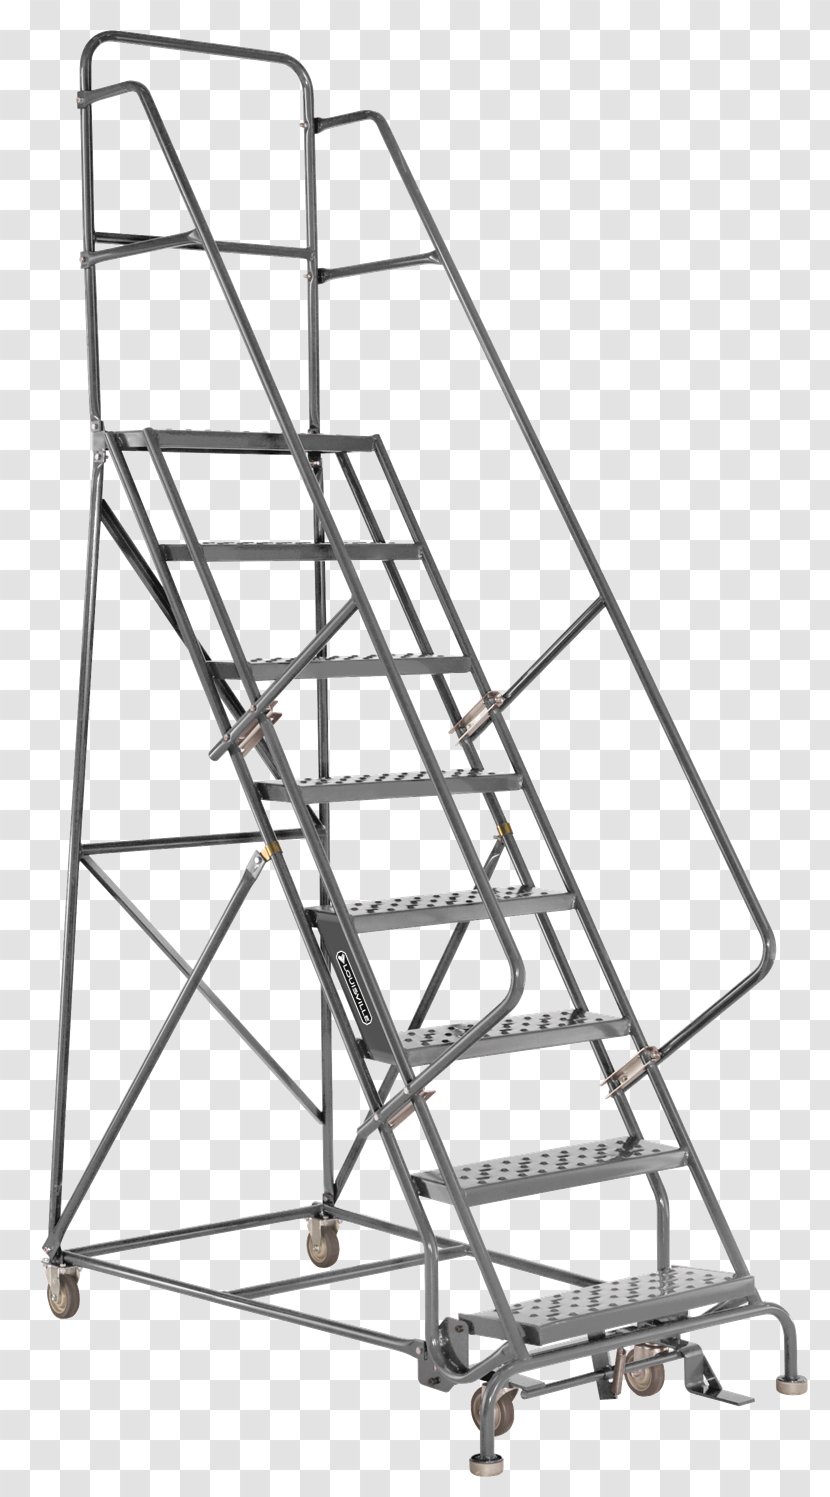 Ladder Stairs Warehouse Rolling Handrail - Ladders Transparent PNG